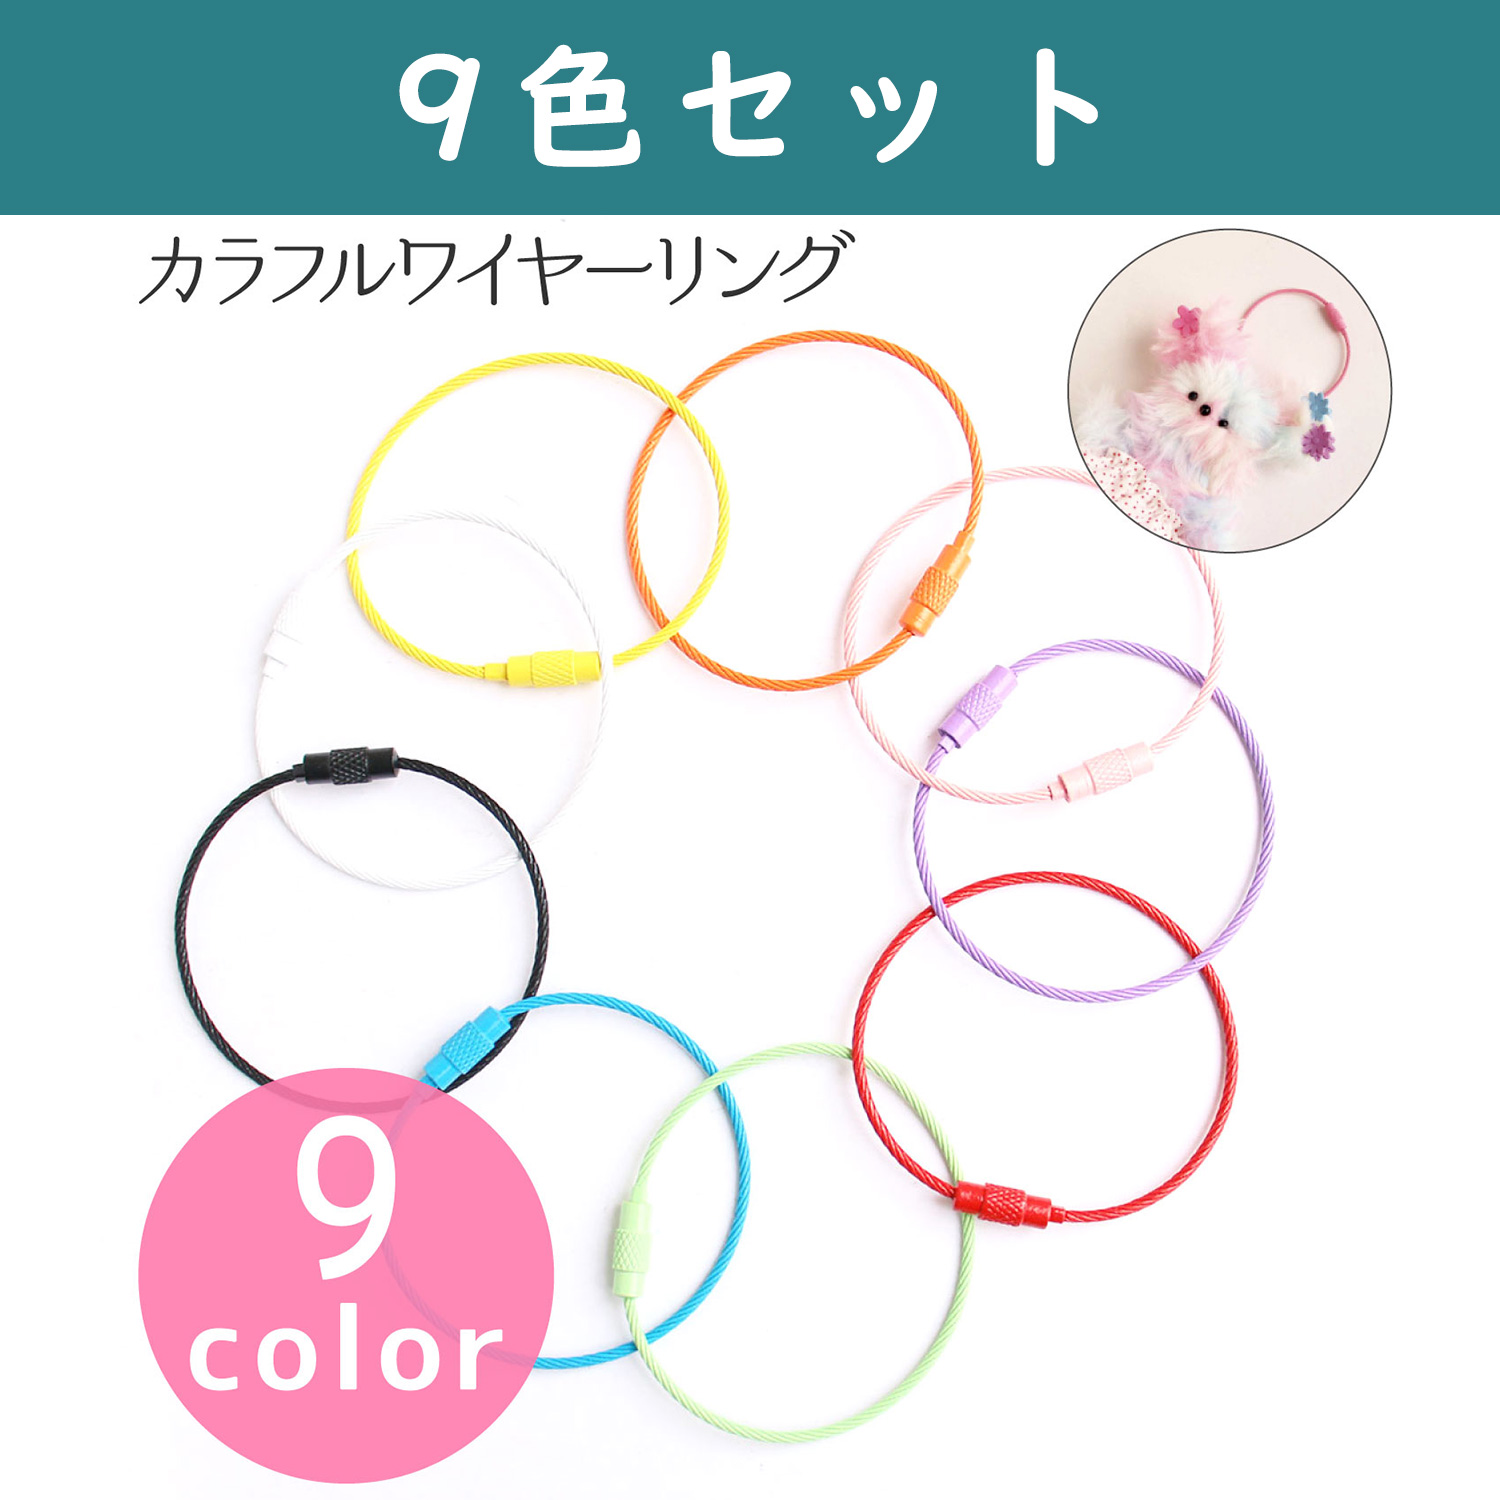 MOL-WRMIX Molle Doll Korean Goods Colorful Wire Ring Mix 9 pieces Moldoll Key Chain (Bag)